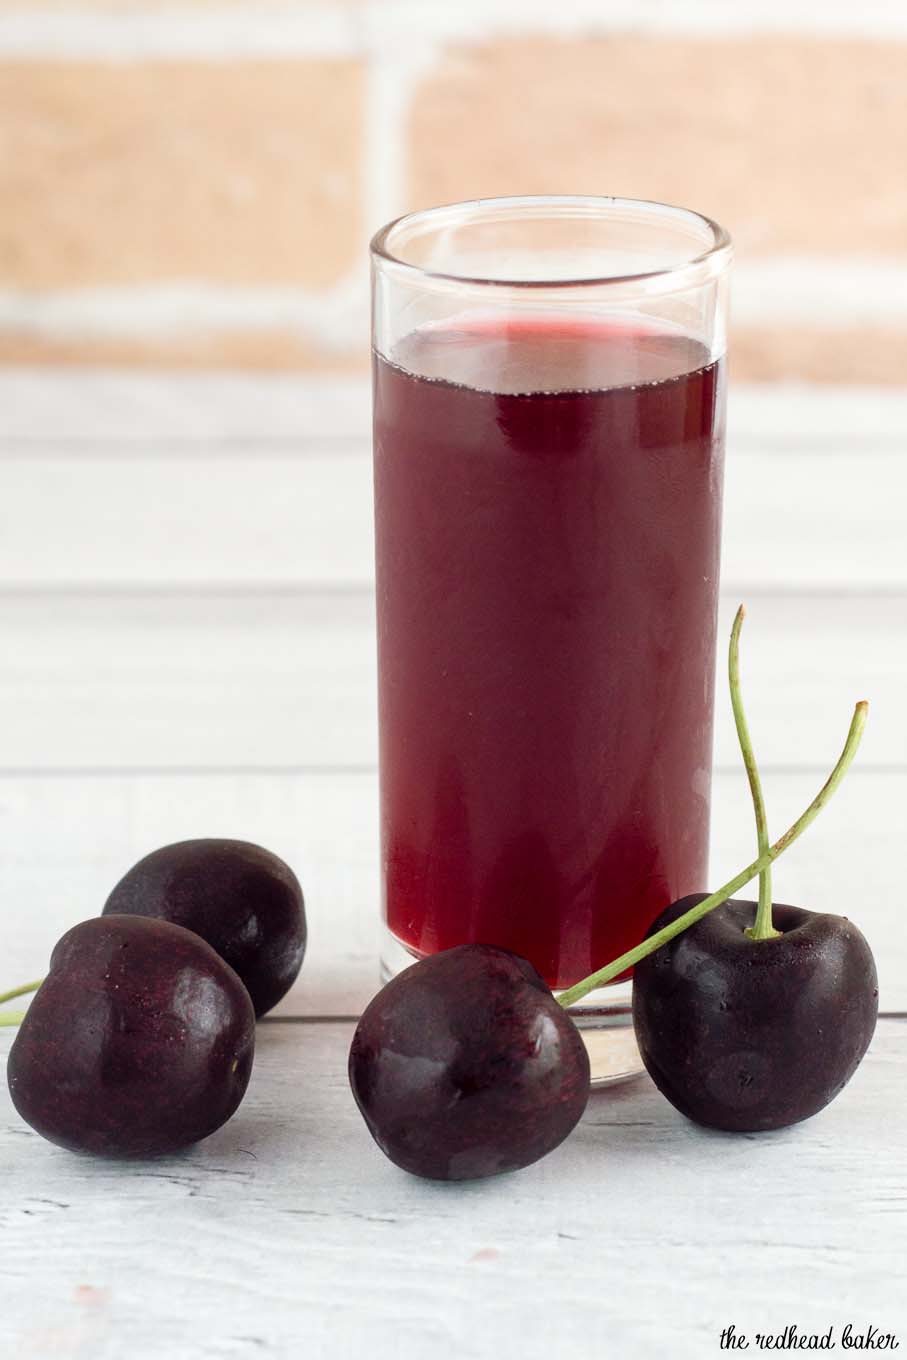 A cherry shrub is a fruit syrup preserved with vinegar, dating back to Colonial America. It can be used to make refreshing cocktails.